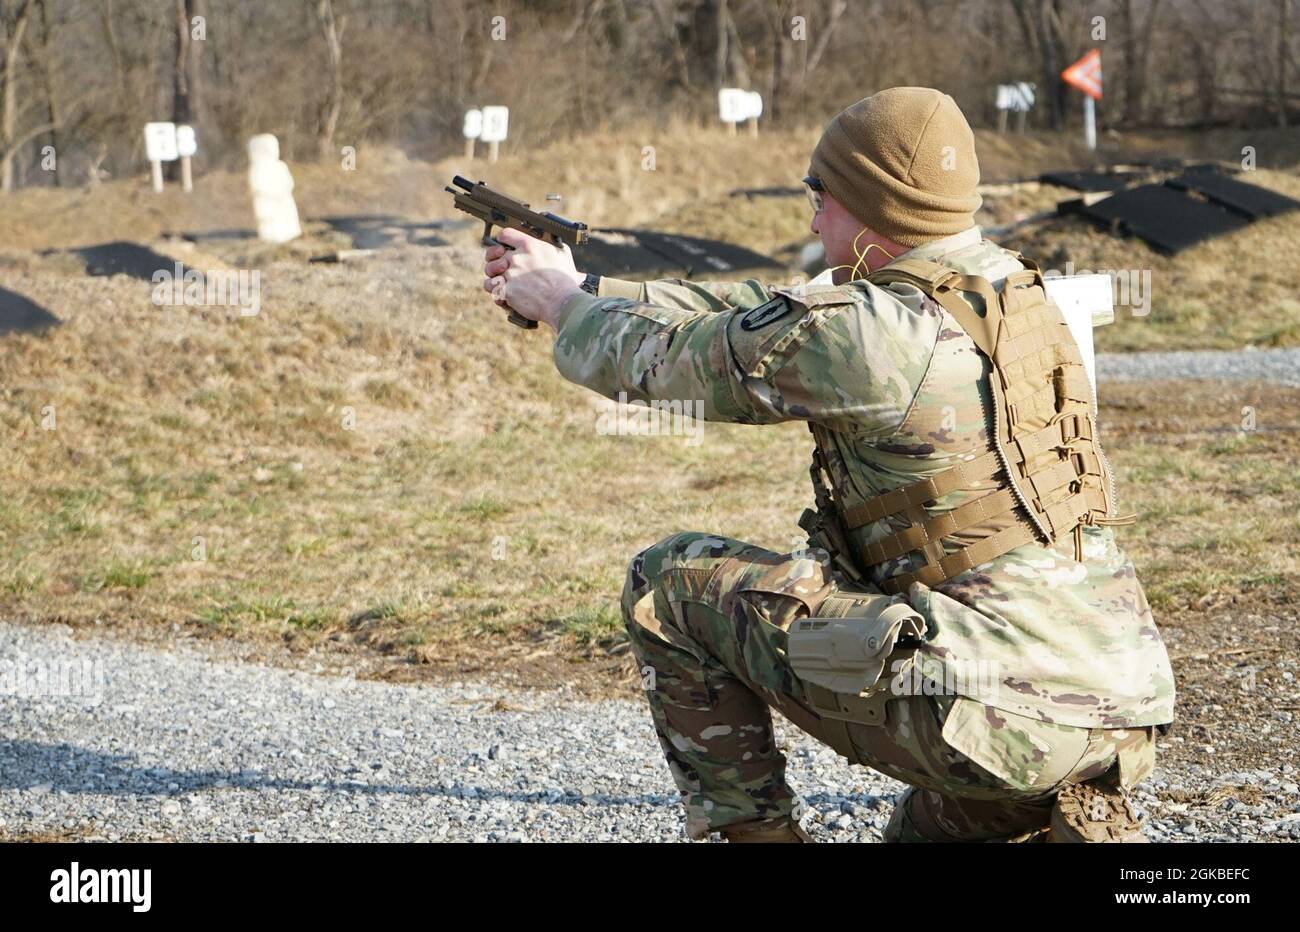 Staff Sgt. Dylan Pitetti, a Soldier from Pennsylvania Joint Force Headquarters, engages a pop up target from the kneeling position during the M17 pistol qualification part of the Pennsylvania Army National Guard's Best Warrior Competition on March 4, 2021, at Fort Indiantown Gap, Pa. The range portion of the competition consisted of qualification with the M4 carbine, M17 pistol, and M500 shotgun. Stock Photo